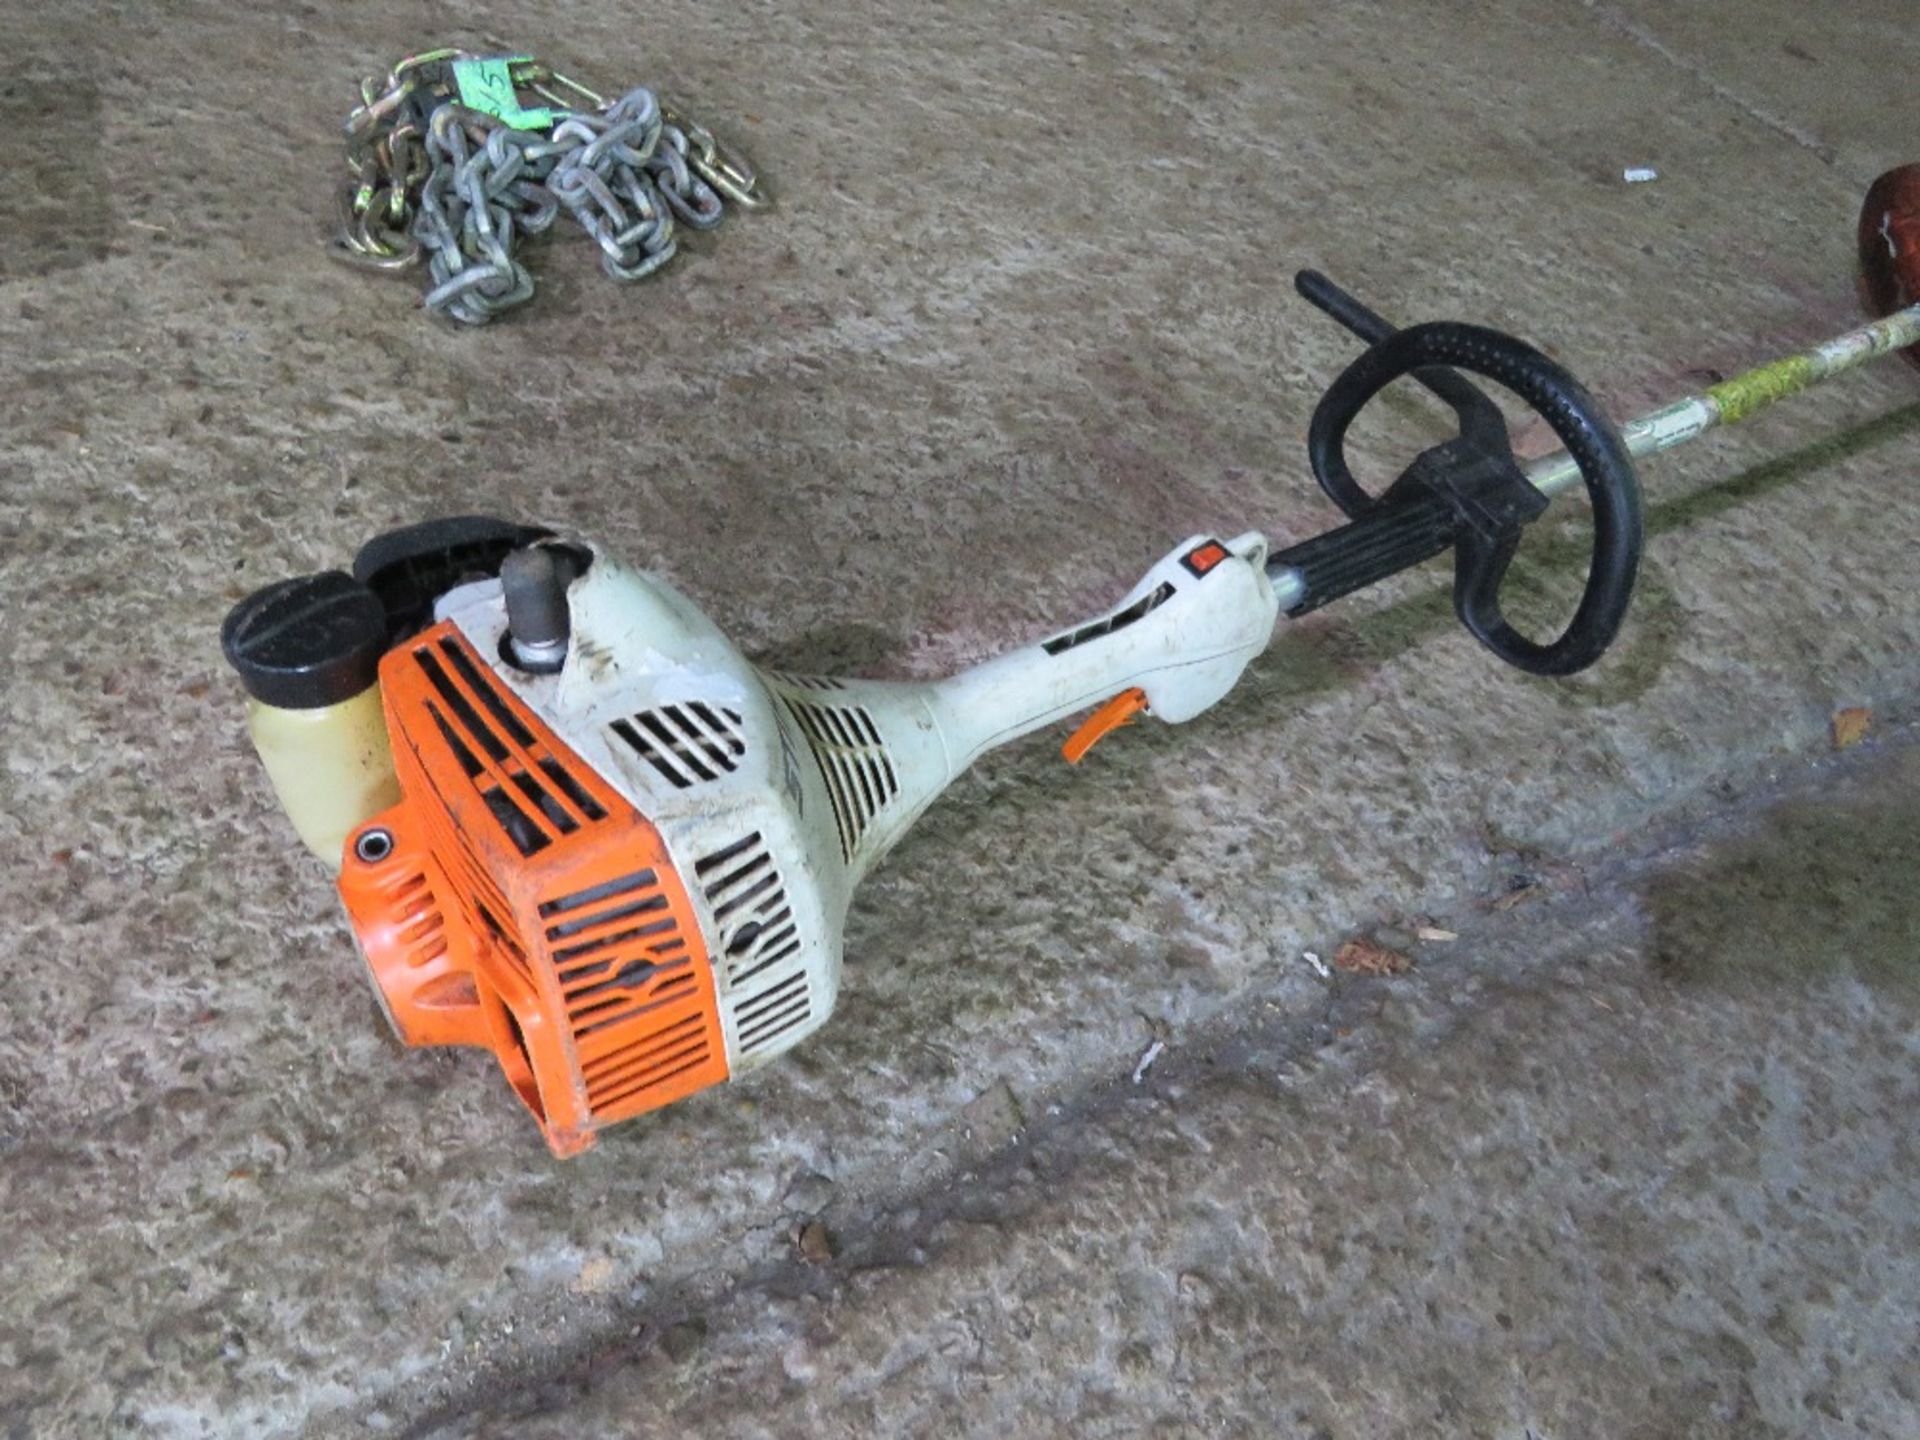 STIHL STRIMMER, REQUIRES RECOIL ROPE. DIRECT FROM LANDSCAPE MAINTENANCE COMPANY DUE TO DEPOT CLO - Image 4 of 6